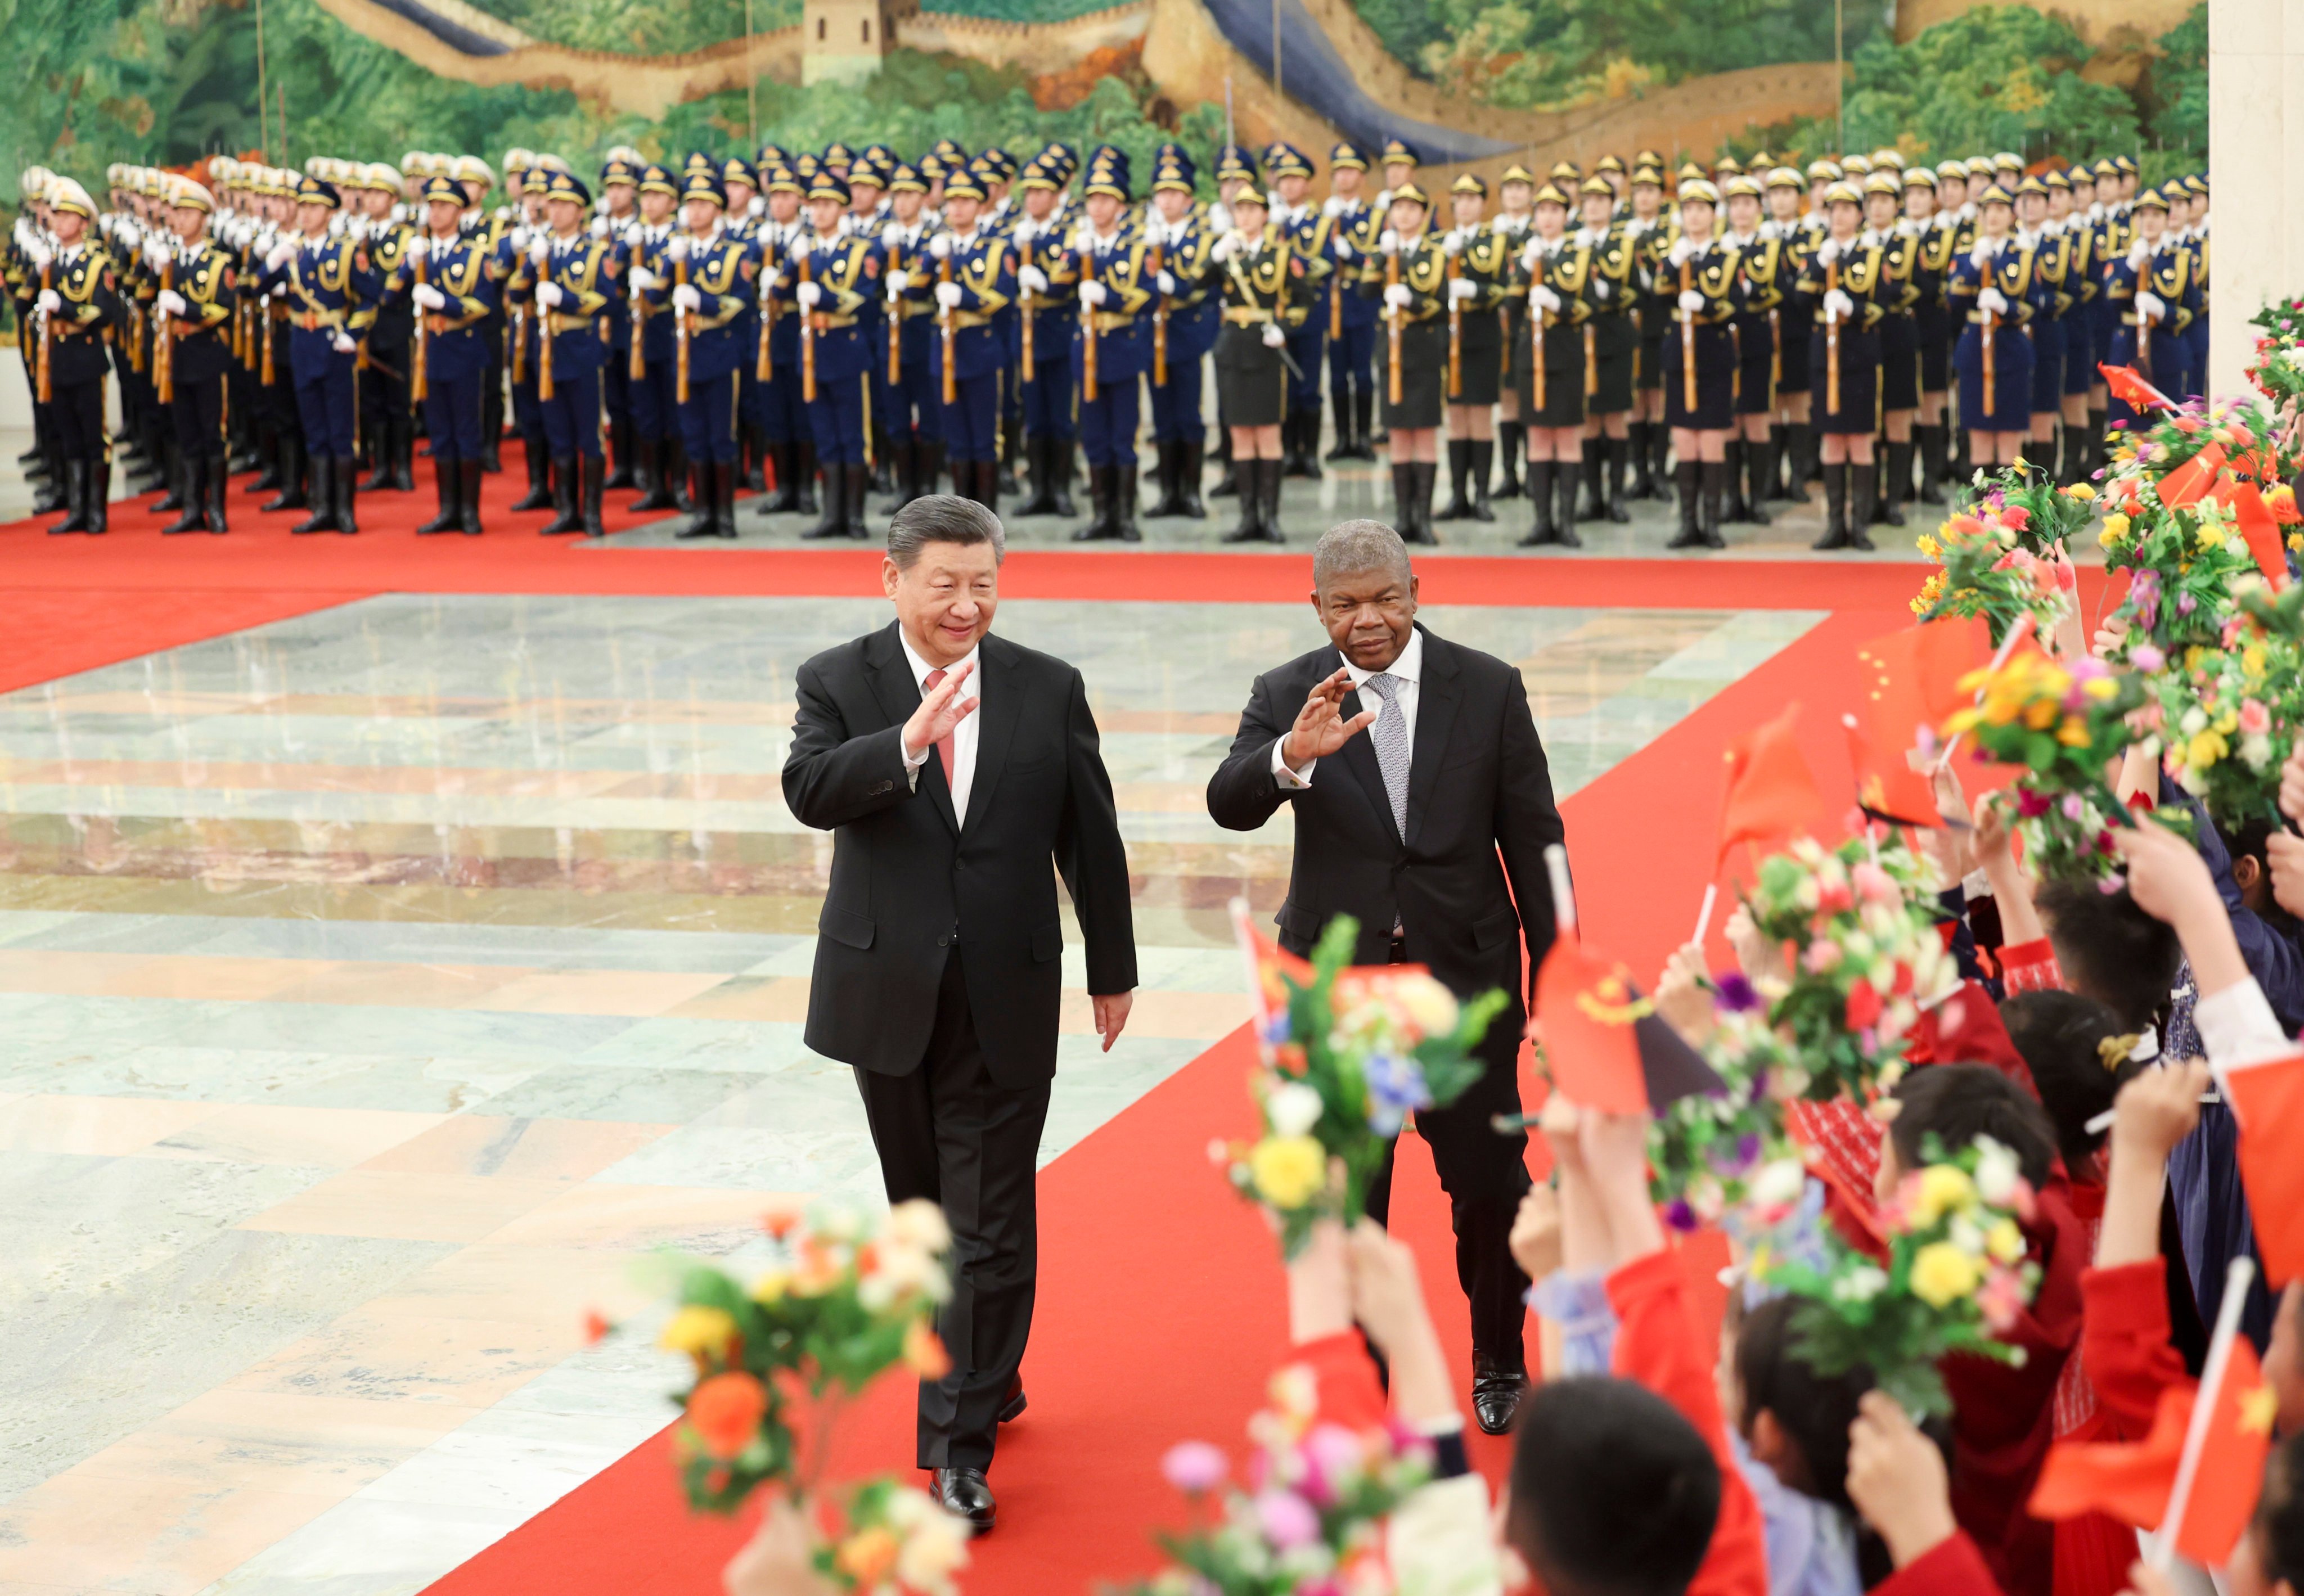 Chinese President Xi Jinping accompanies Angolan President Joao Lourenco during a welcome ceremony at the Great Hall of the People in Beijing on Friday. Photo: Xinhua